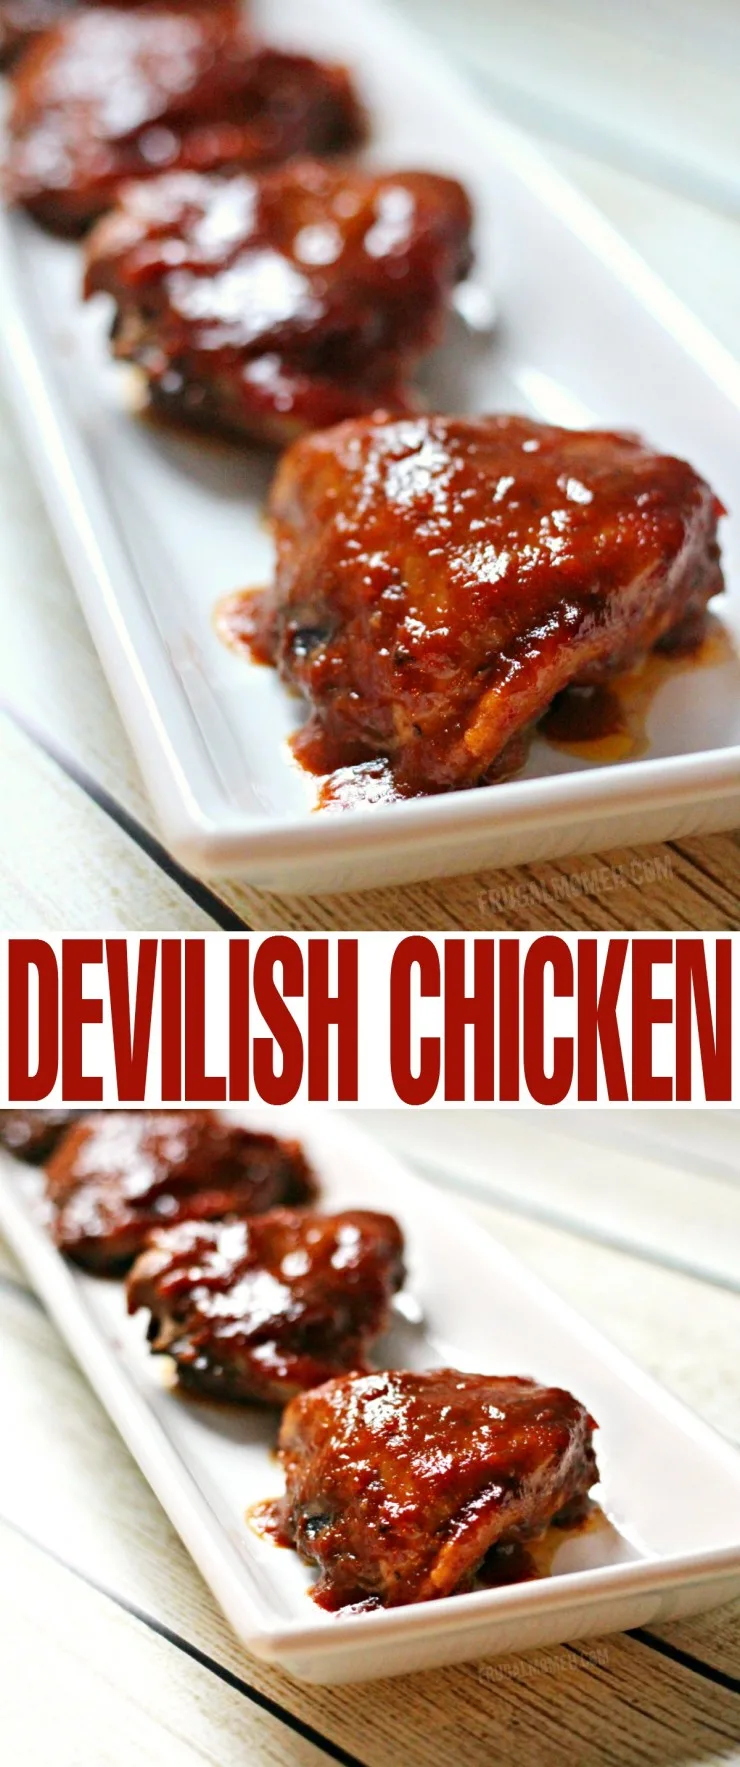 Devilish Chicken is a family favourite recipe. It's quick and easy to throw together and full of flavour. Serve with plain rice and spoon sauce over it.